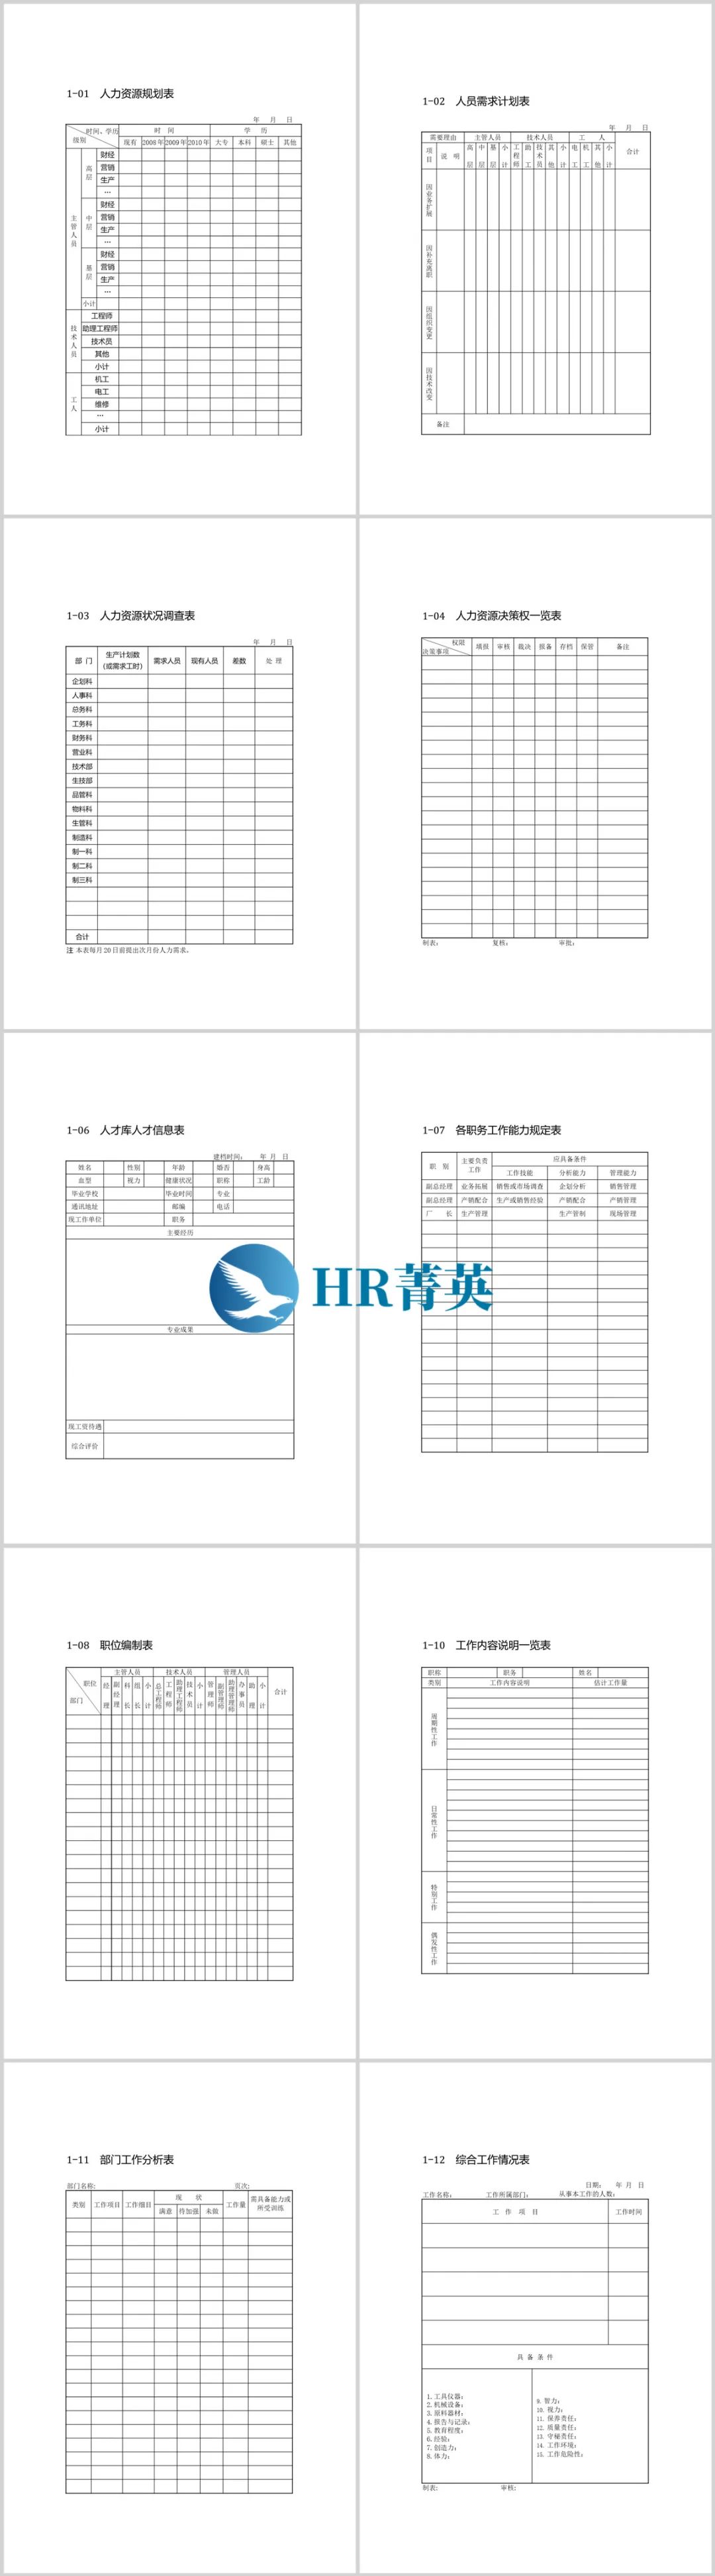 Human resources management form template